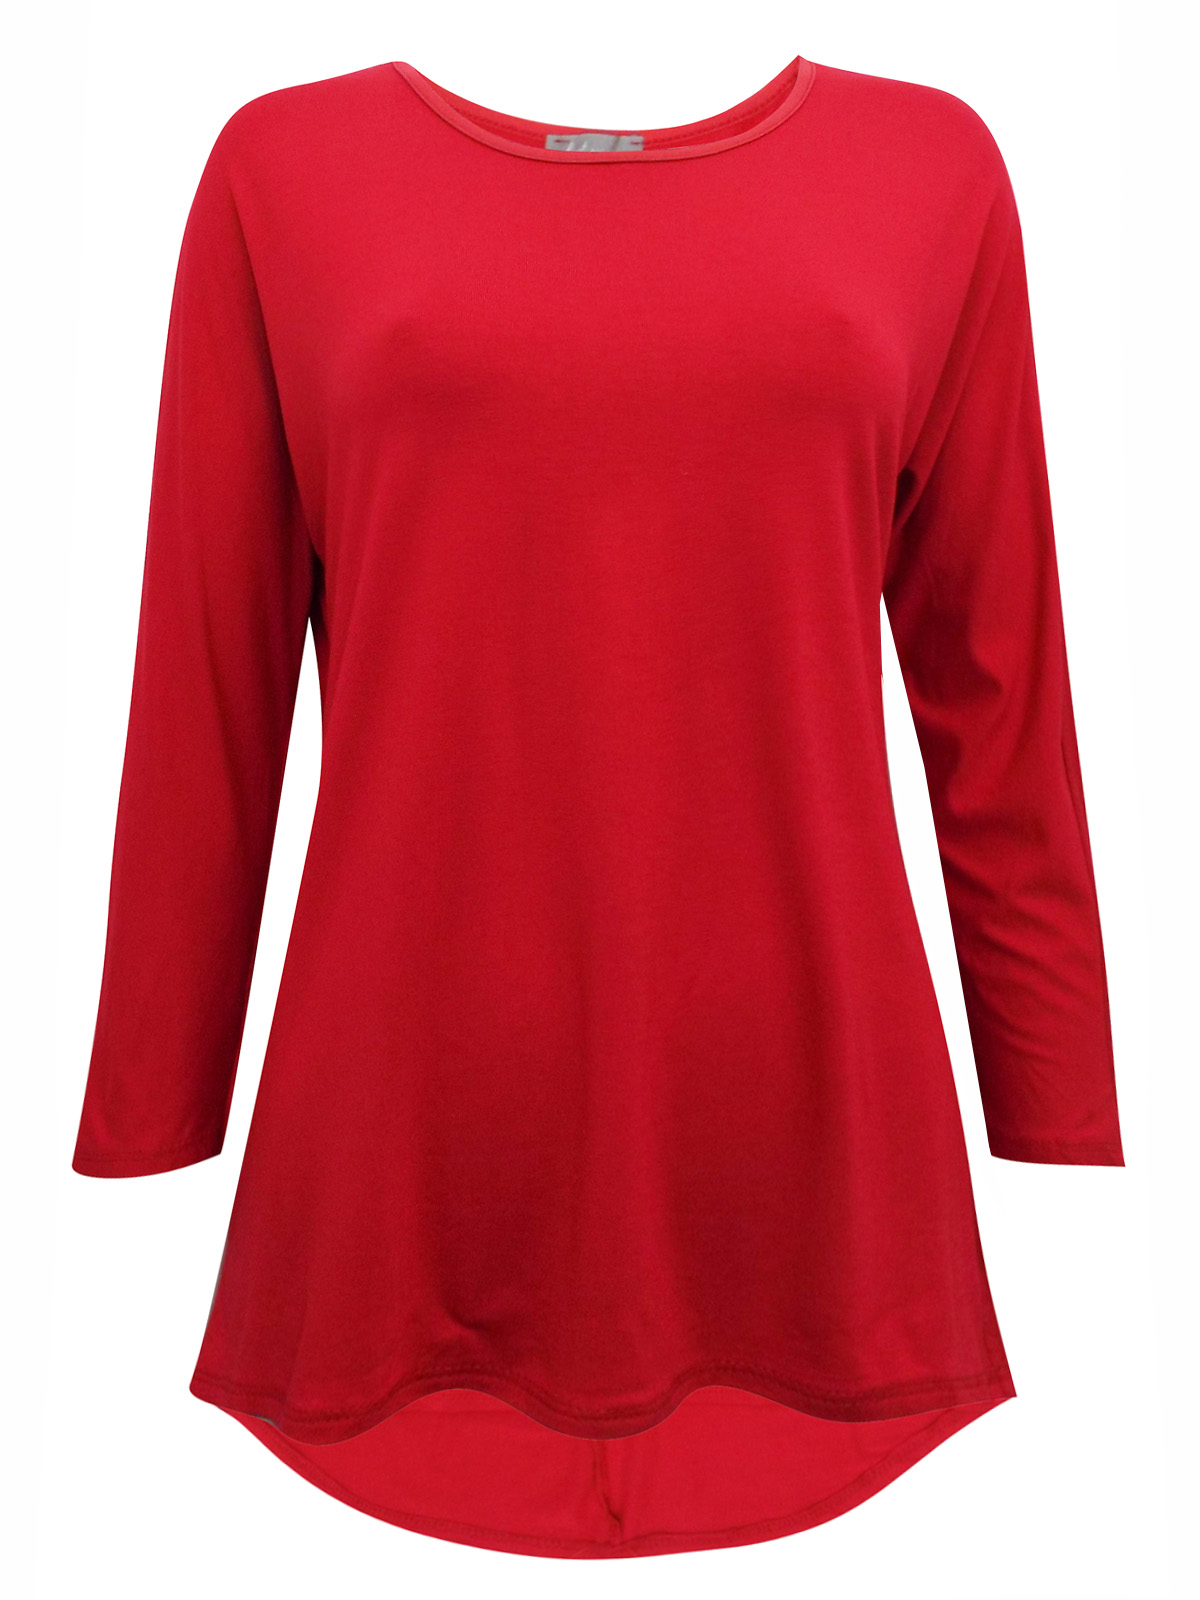 First Avenue RED Dipped Hem Jersey Top - Size 10 to 20